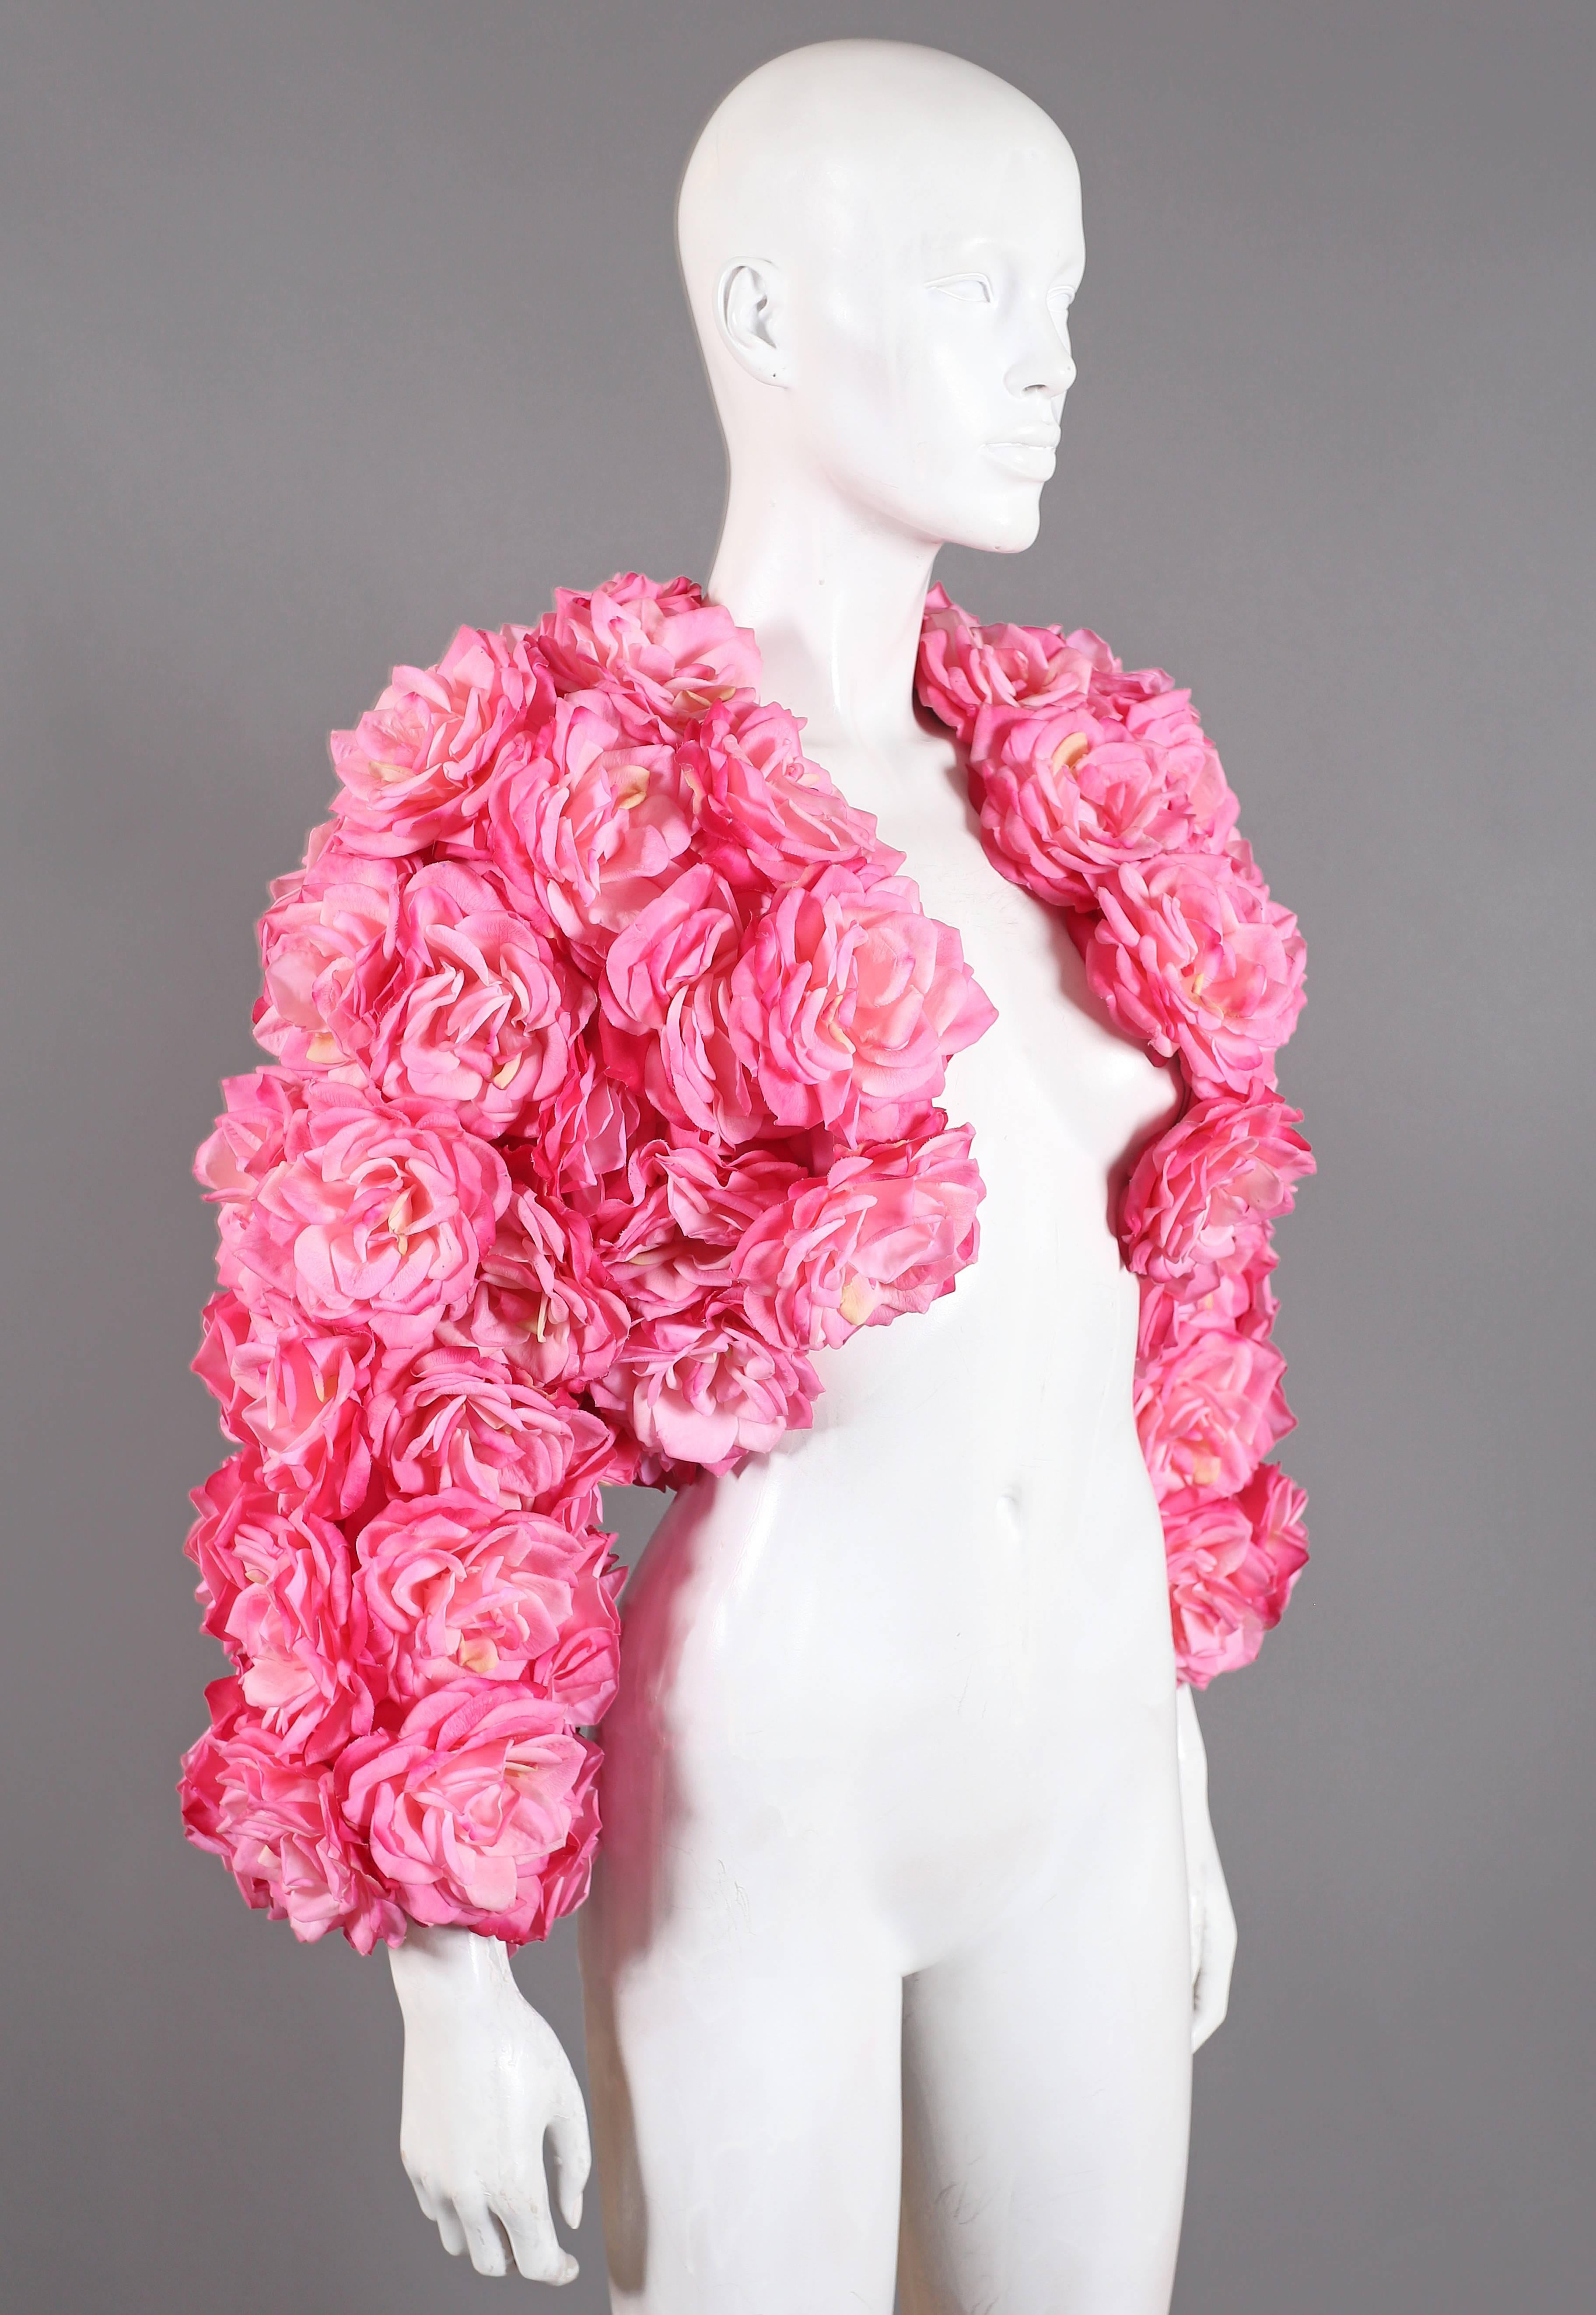 Out of this world oversized bolero jacket by Rachel London. The jacket is adorned in beautiful high quality real touch pink roses which look and feel like real petals! Madonna chose to wear the same design at the Tony Awards in 1988.

Size Small